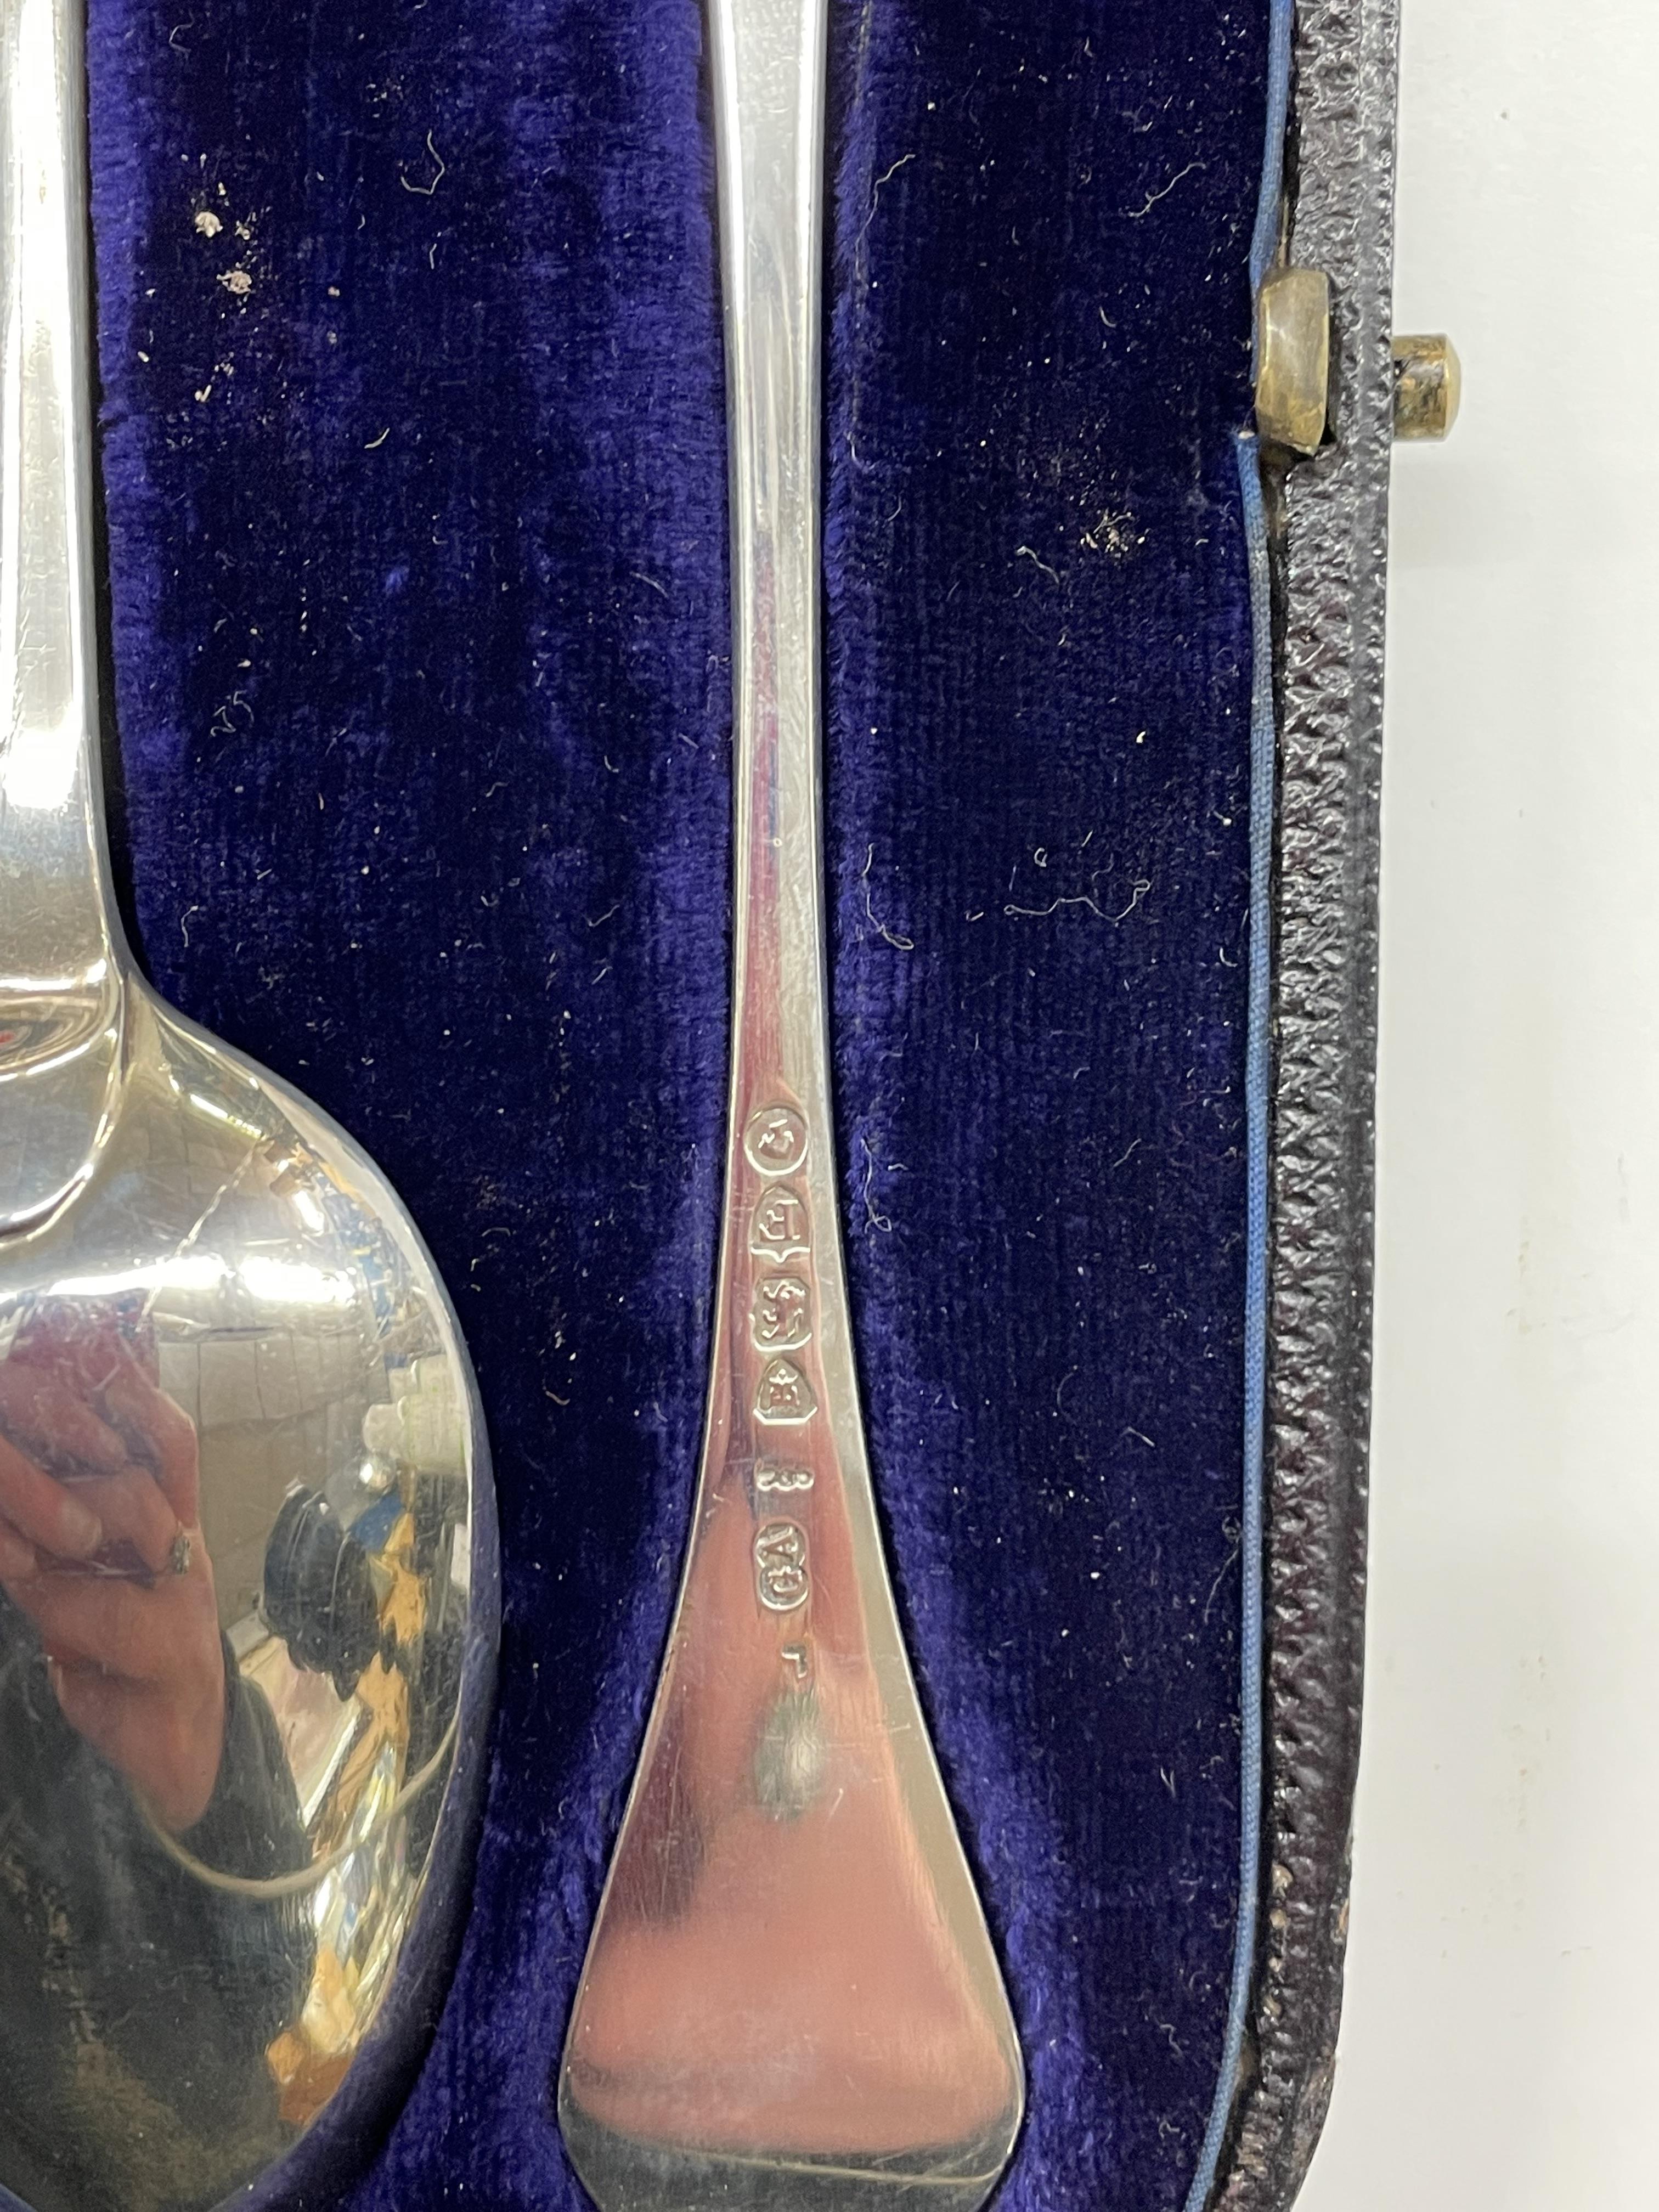 CASED MAPPIN BROTHERS LONDON SILVER SPOON AND FORK BY GEORGE ANGEL - Image 3 of 4